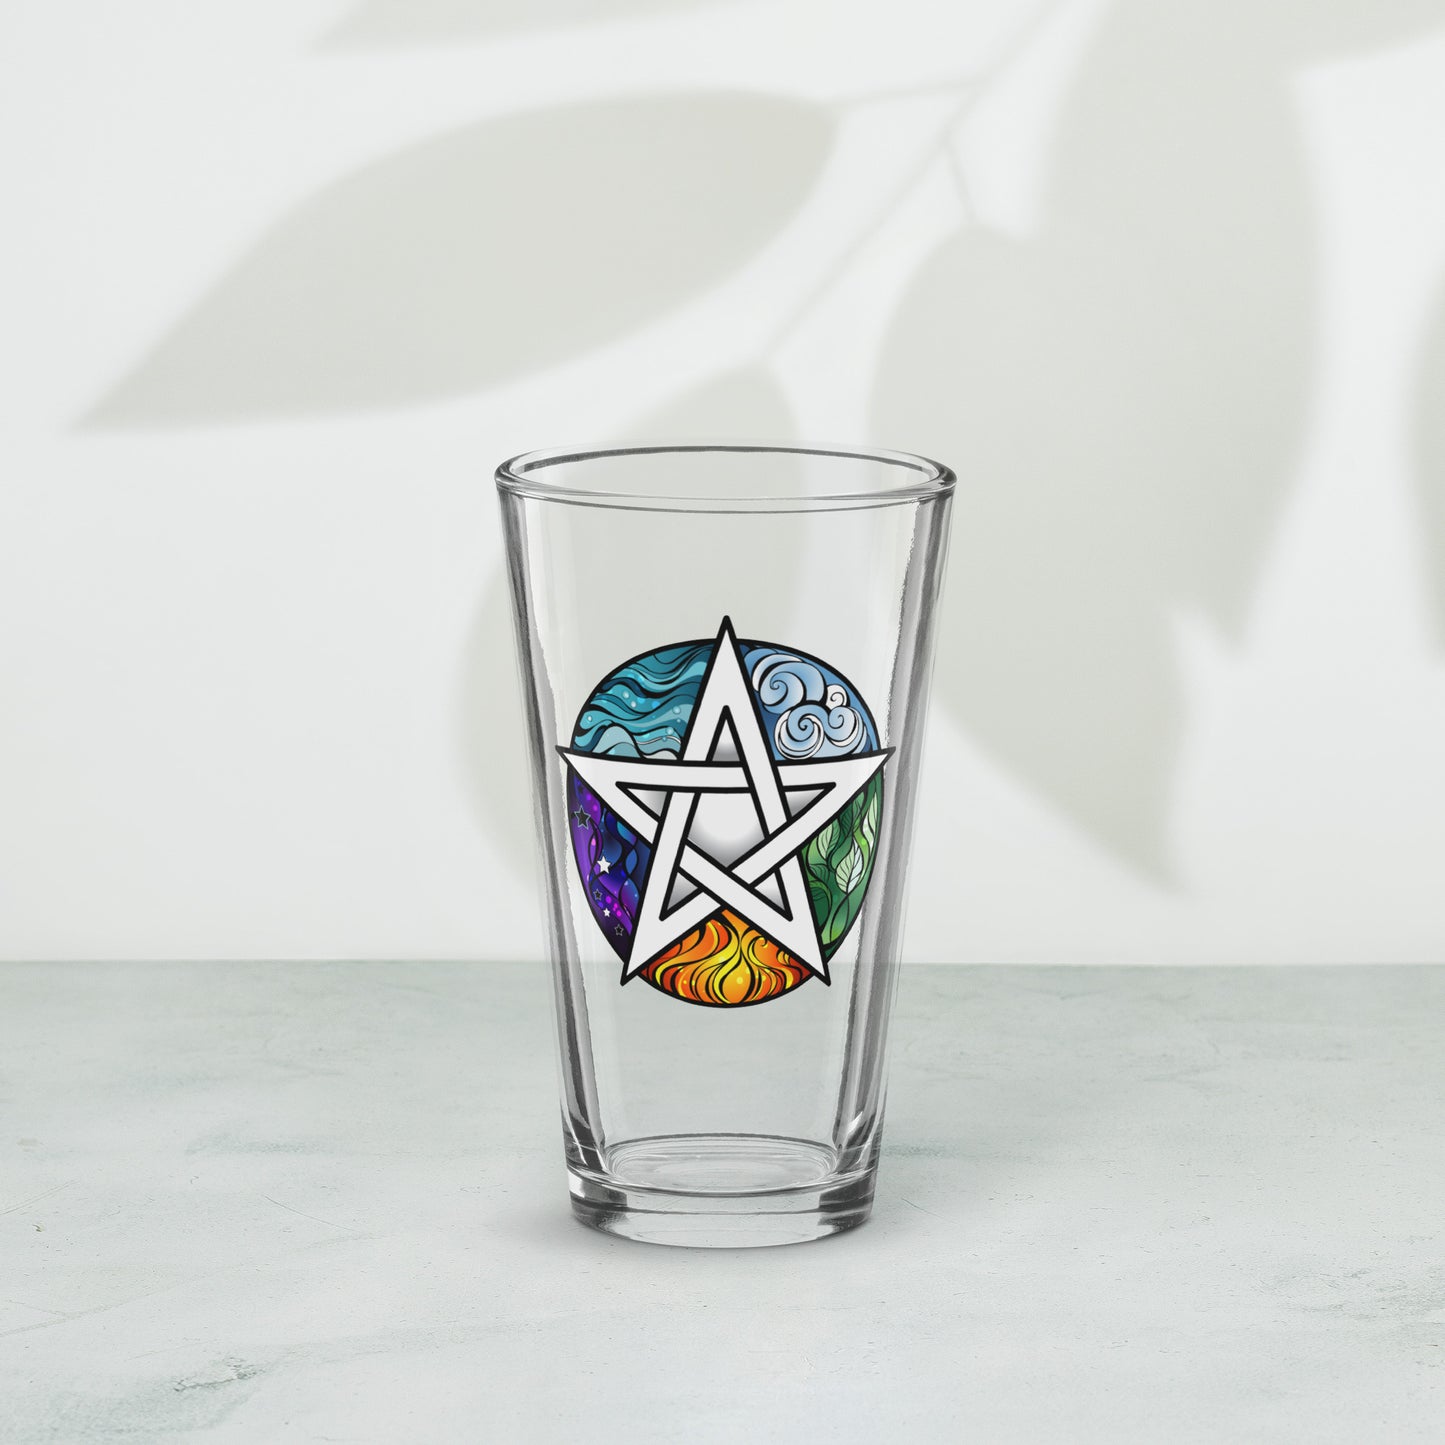 Shaker Pint Glass: Pentacle and Elements